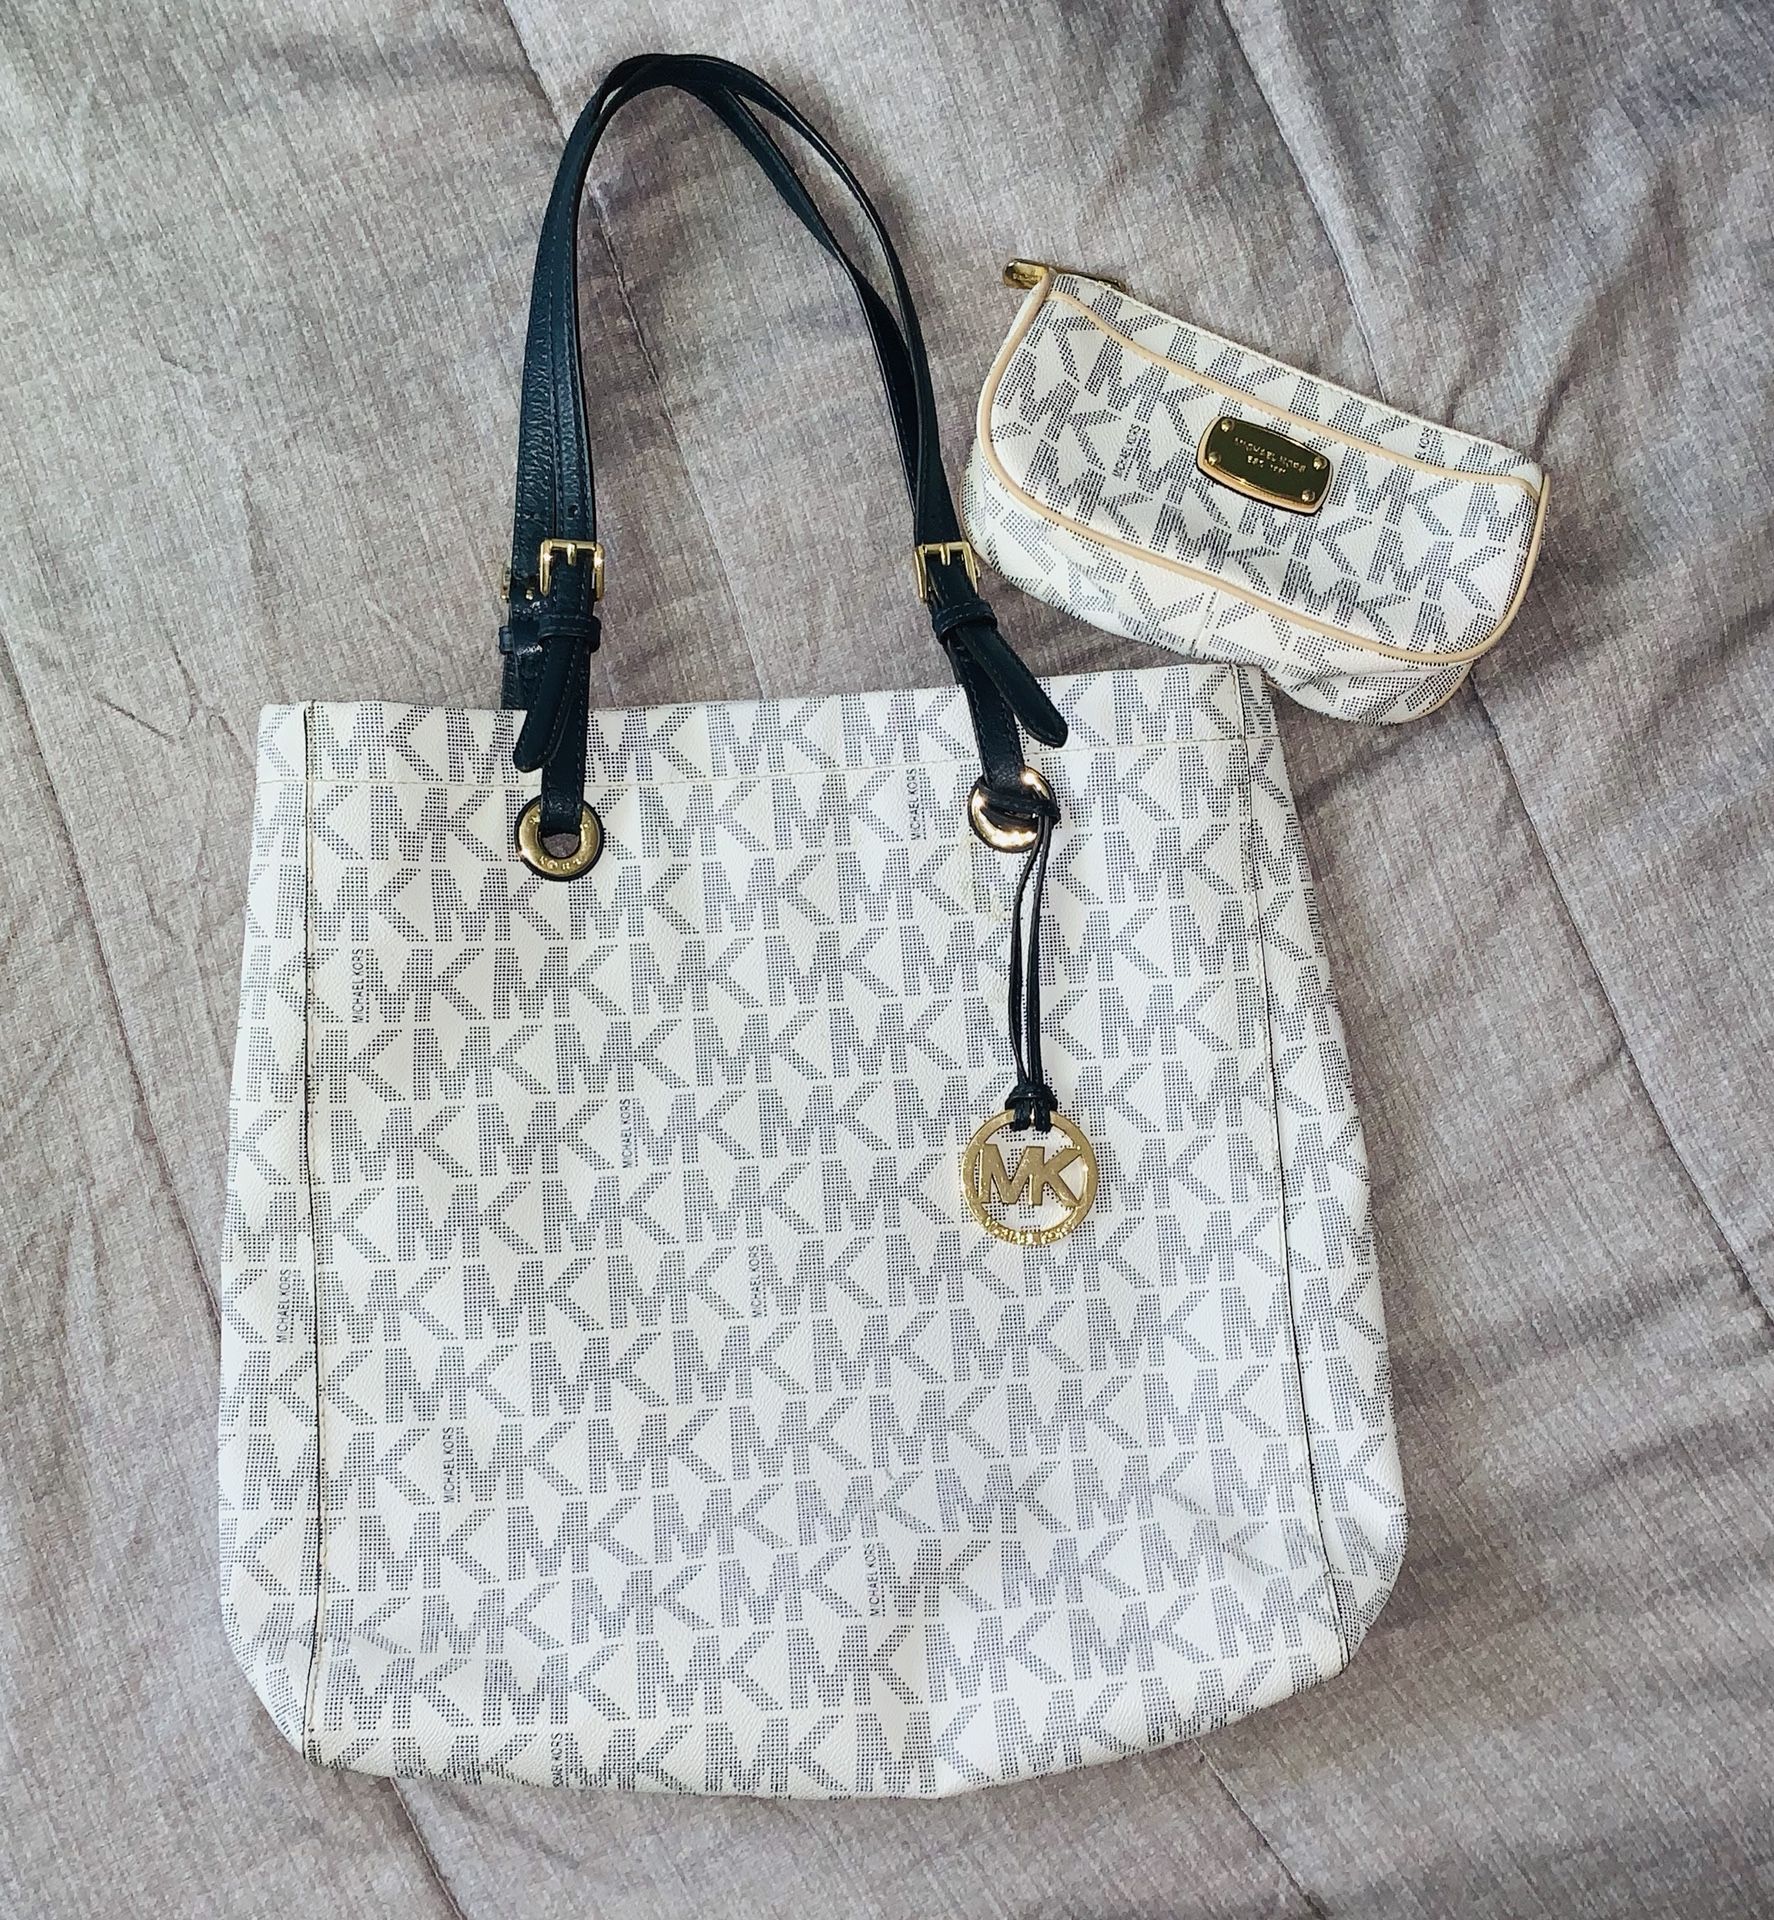 Michael Kors Navy and White purse and wallet